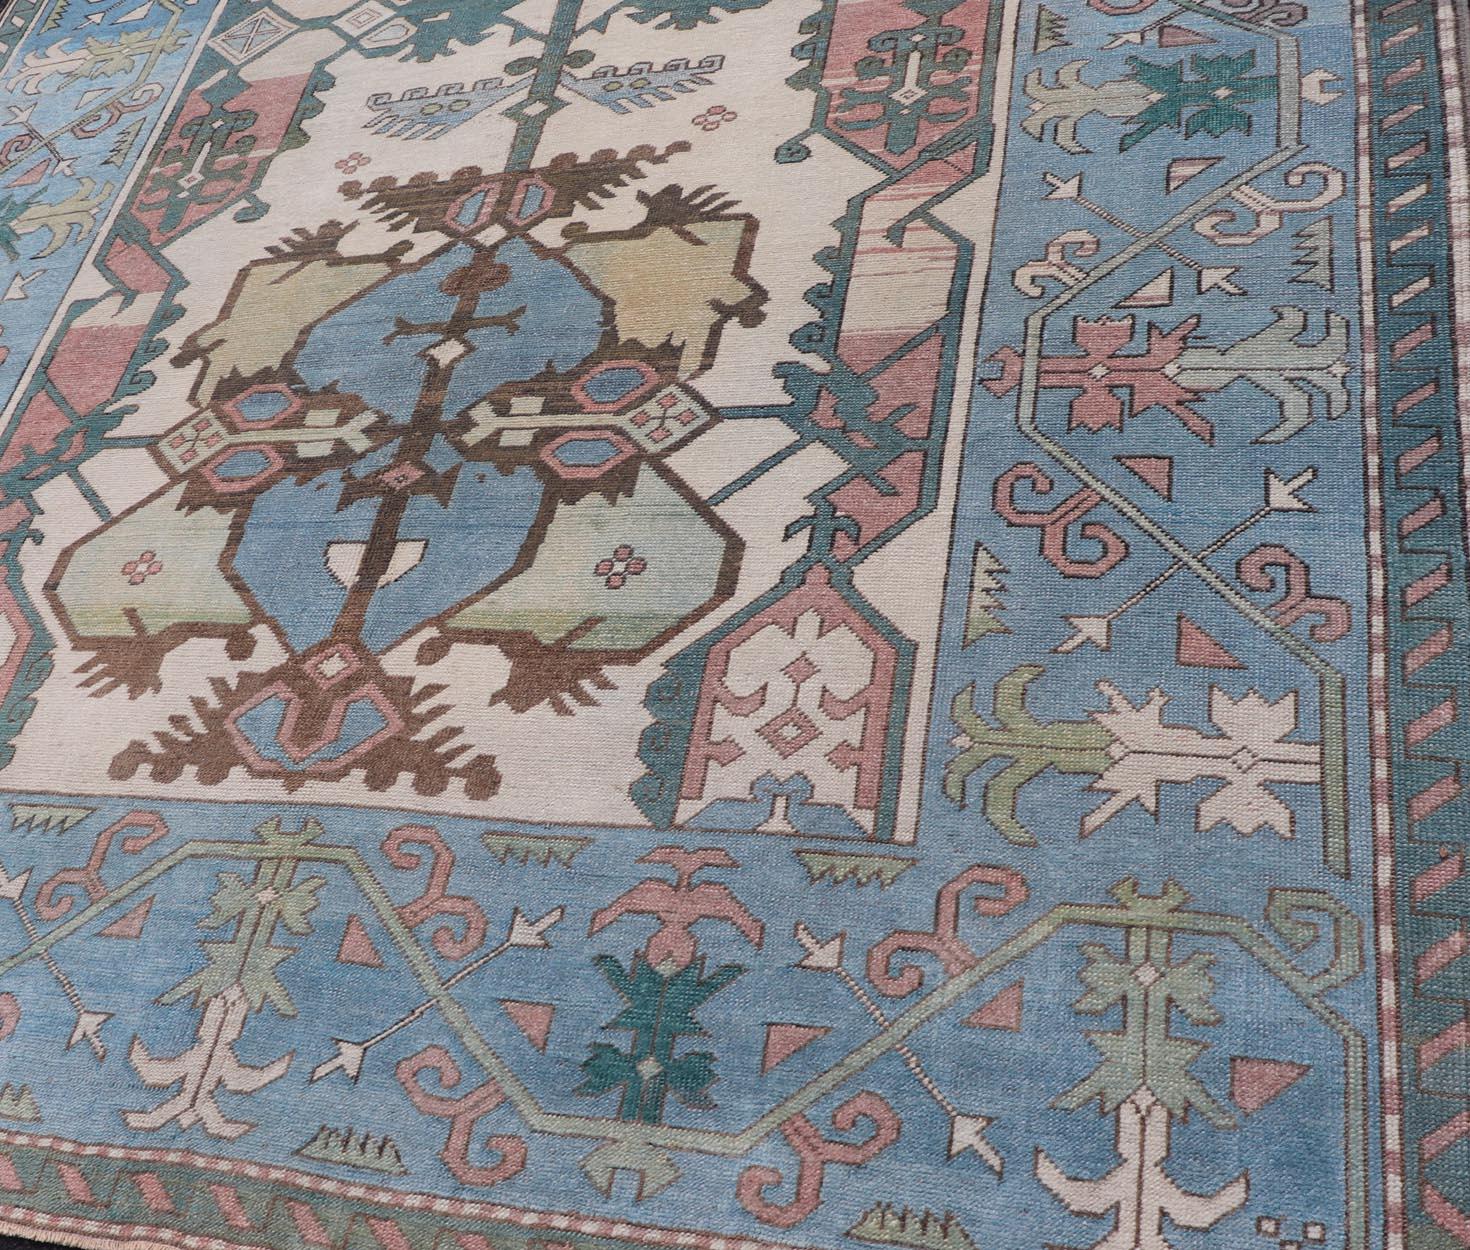 Unique Turkish Rug with Bold Florals in Lt, blue, Lt, Green, Teal & Pink  In Excellent Condition For Sale In Atlanta, GA